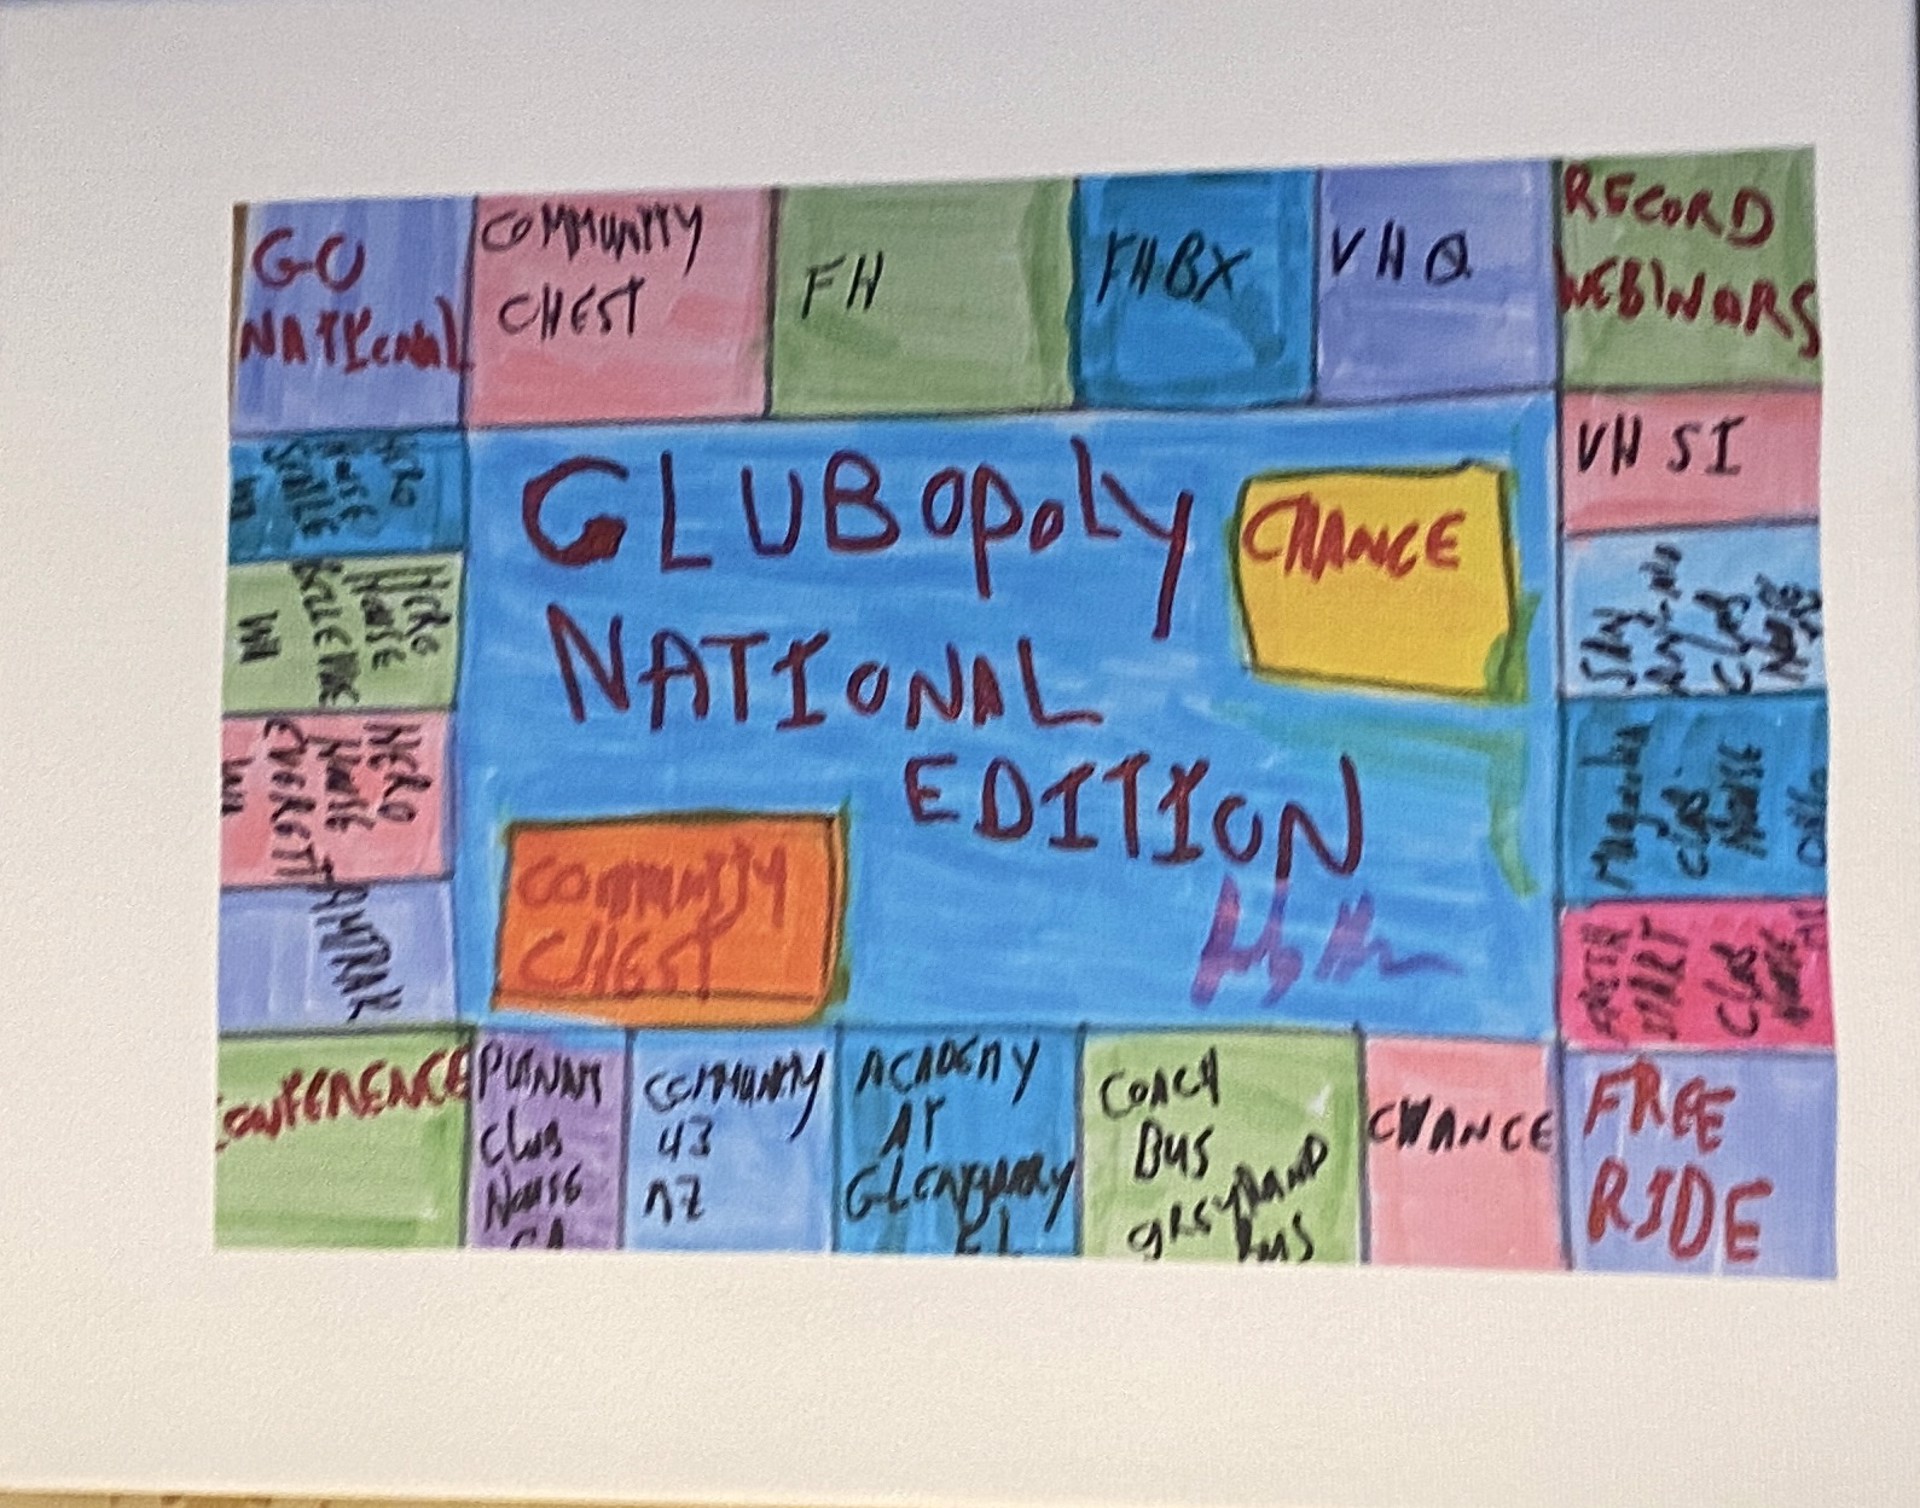 Clubopoly National Edition by Judith Berman